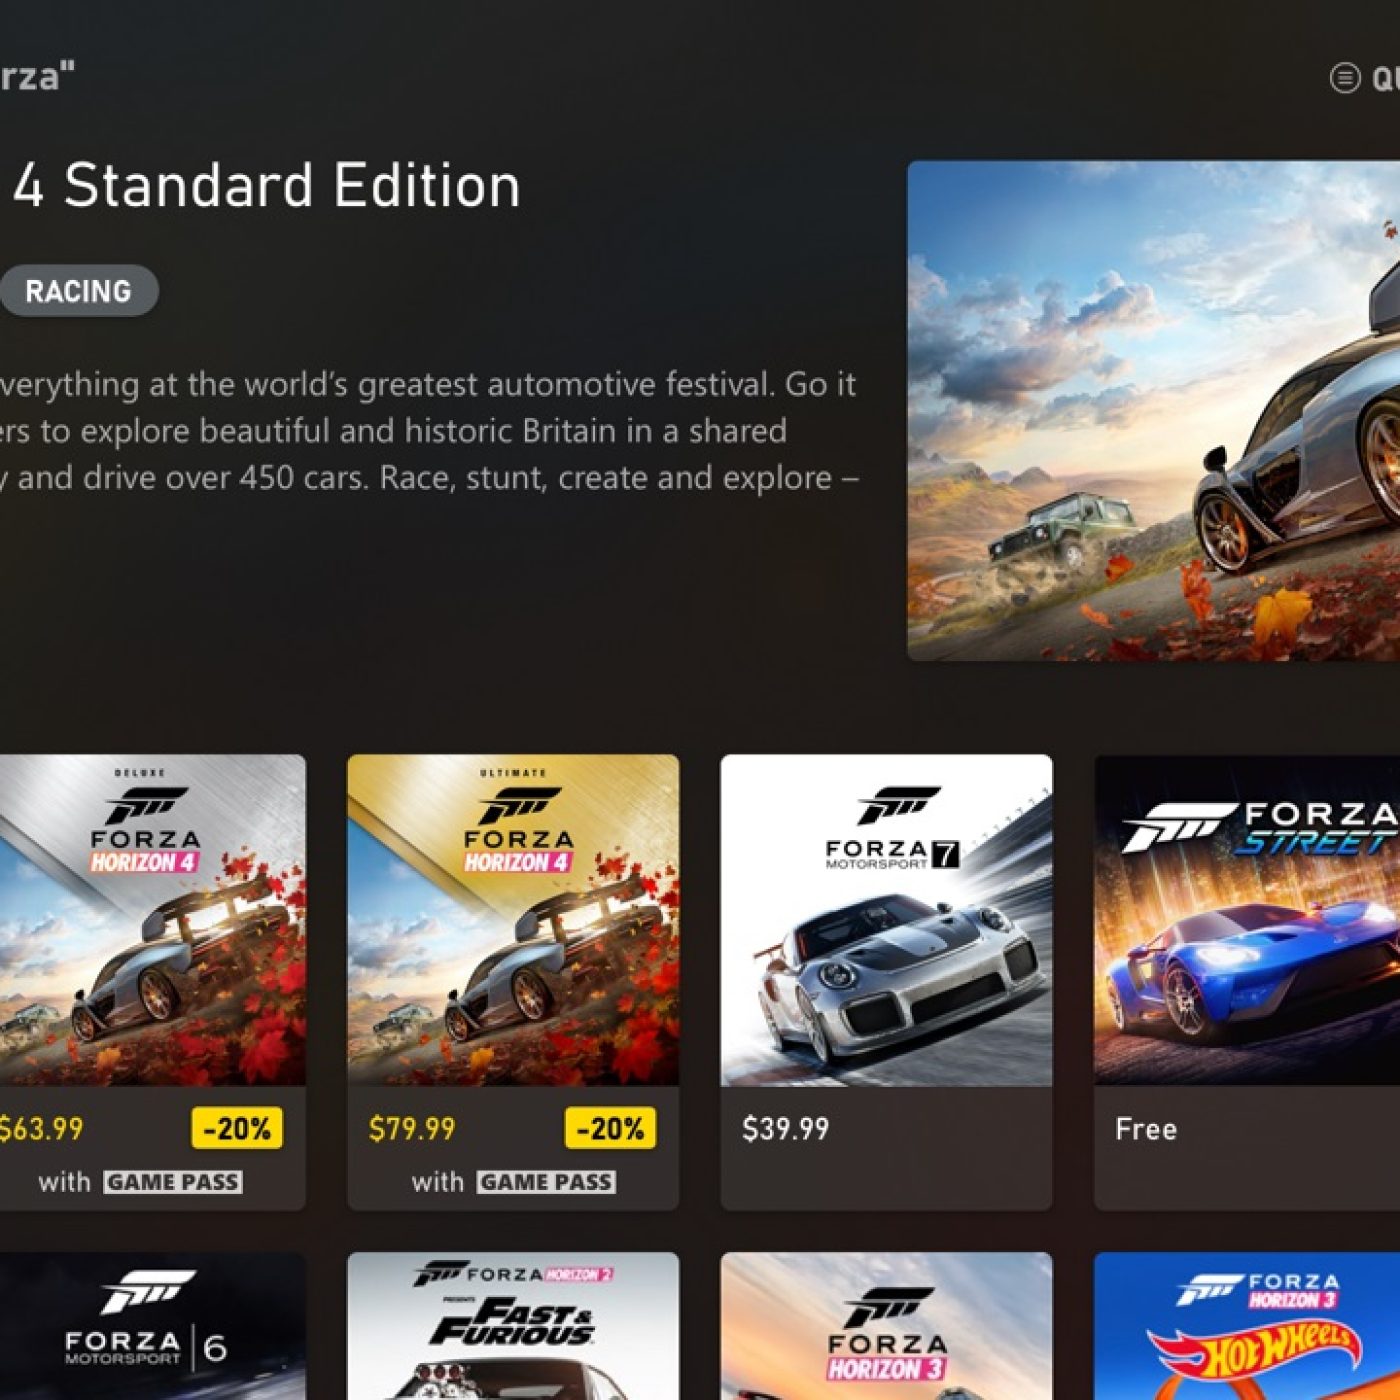 Xbox app will let you download and install games you don't own